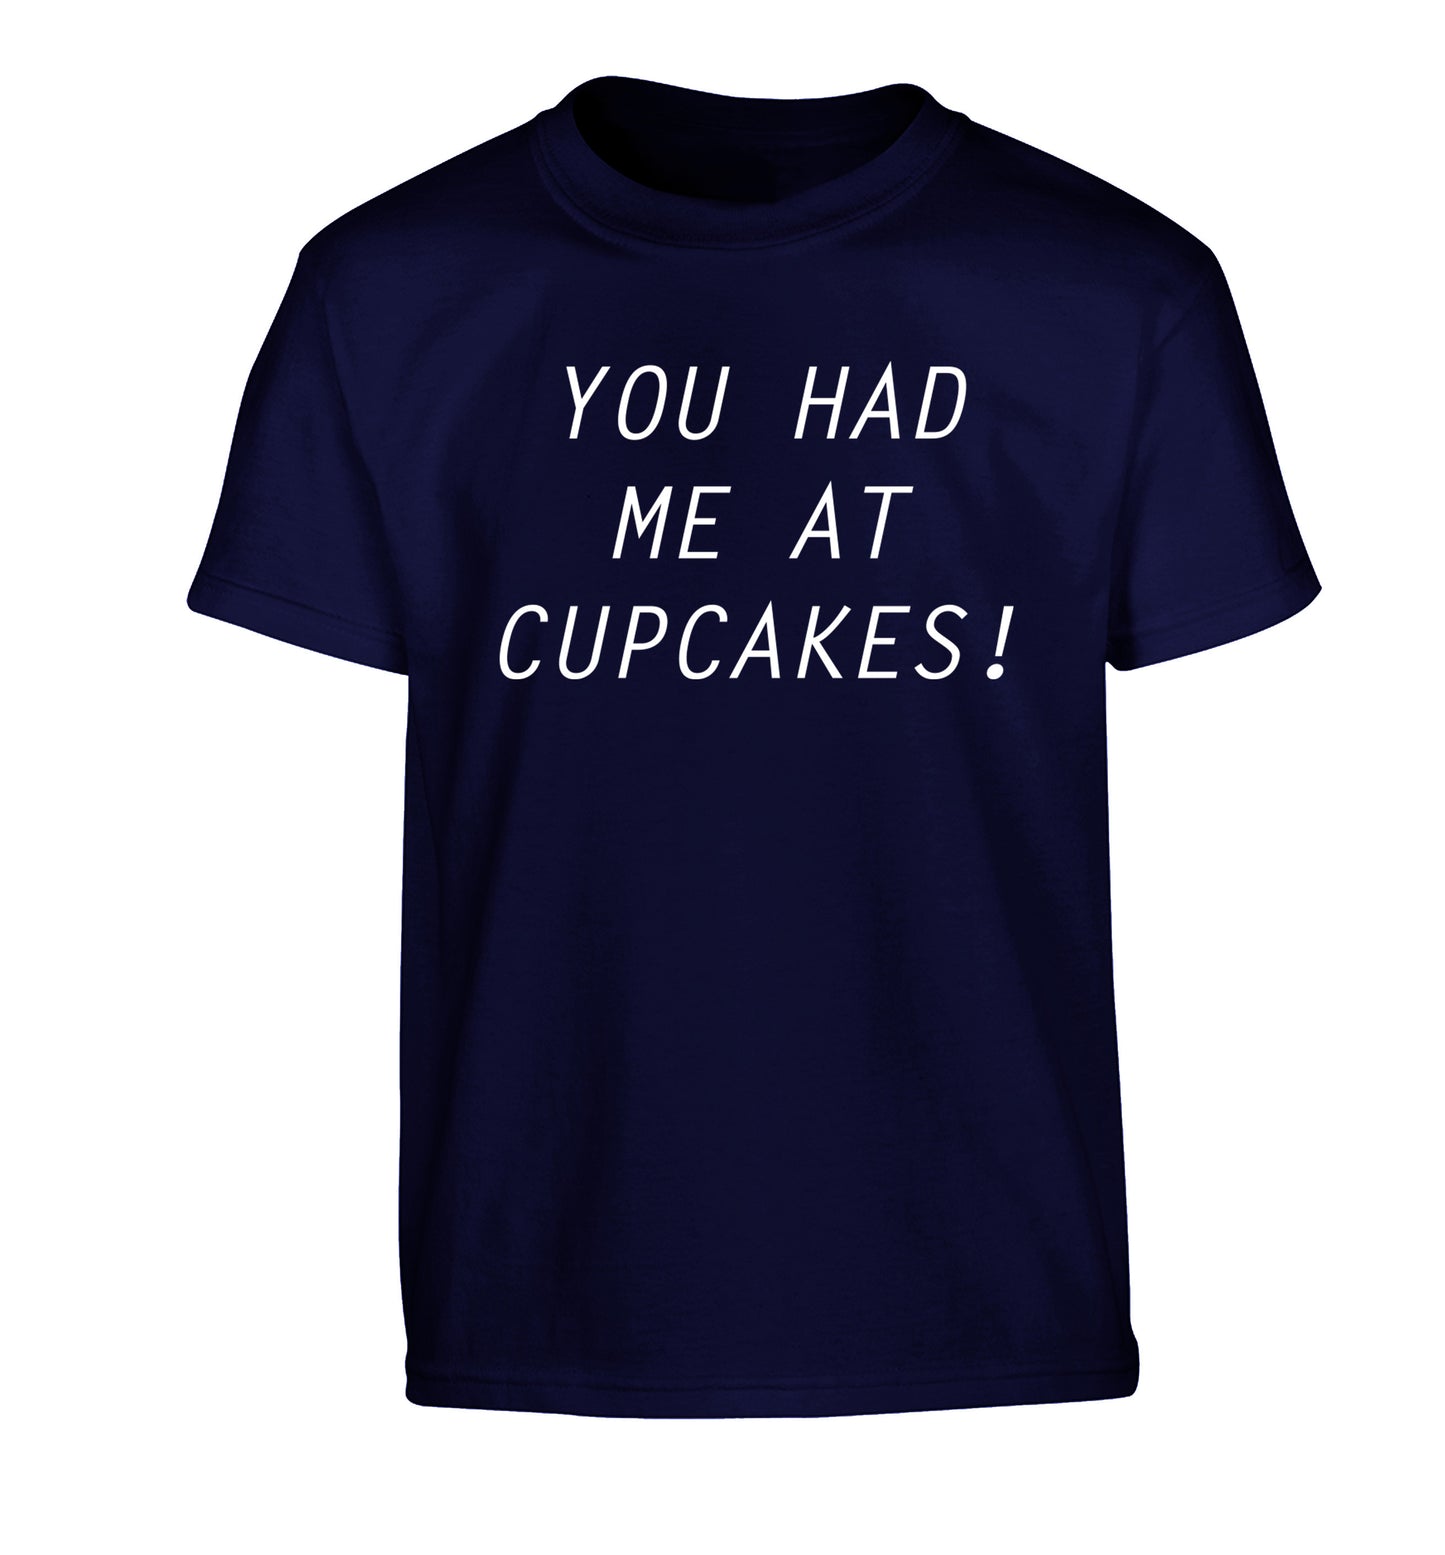 You had me at cupcakes Children's navy Tshirt 12-14 Years